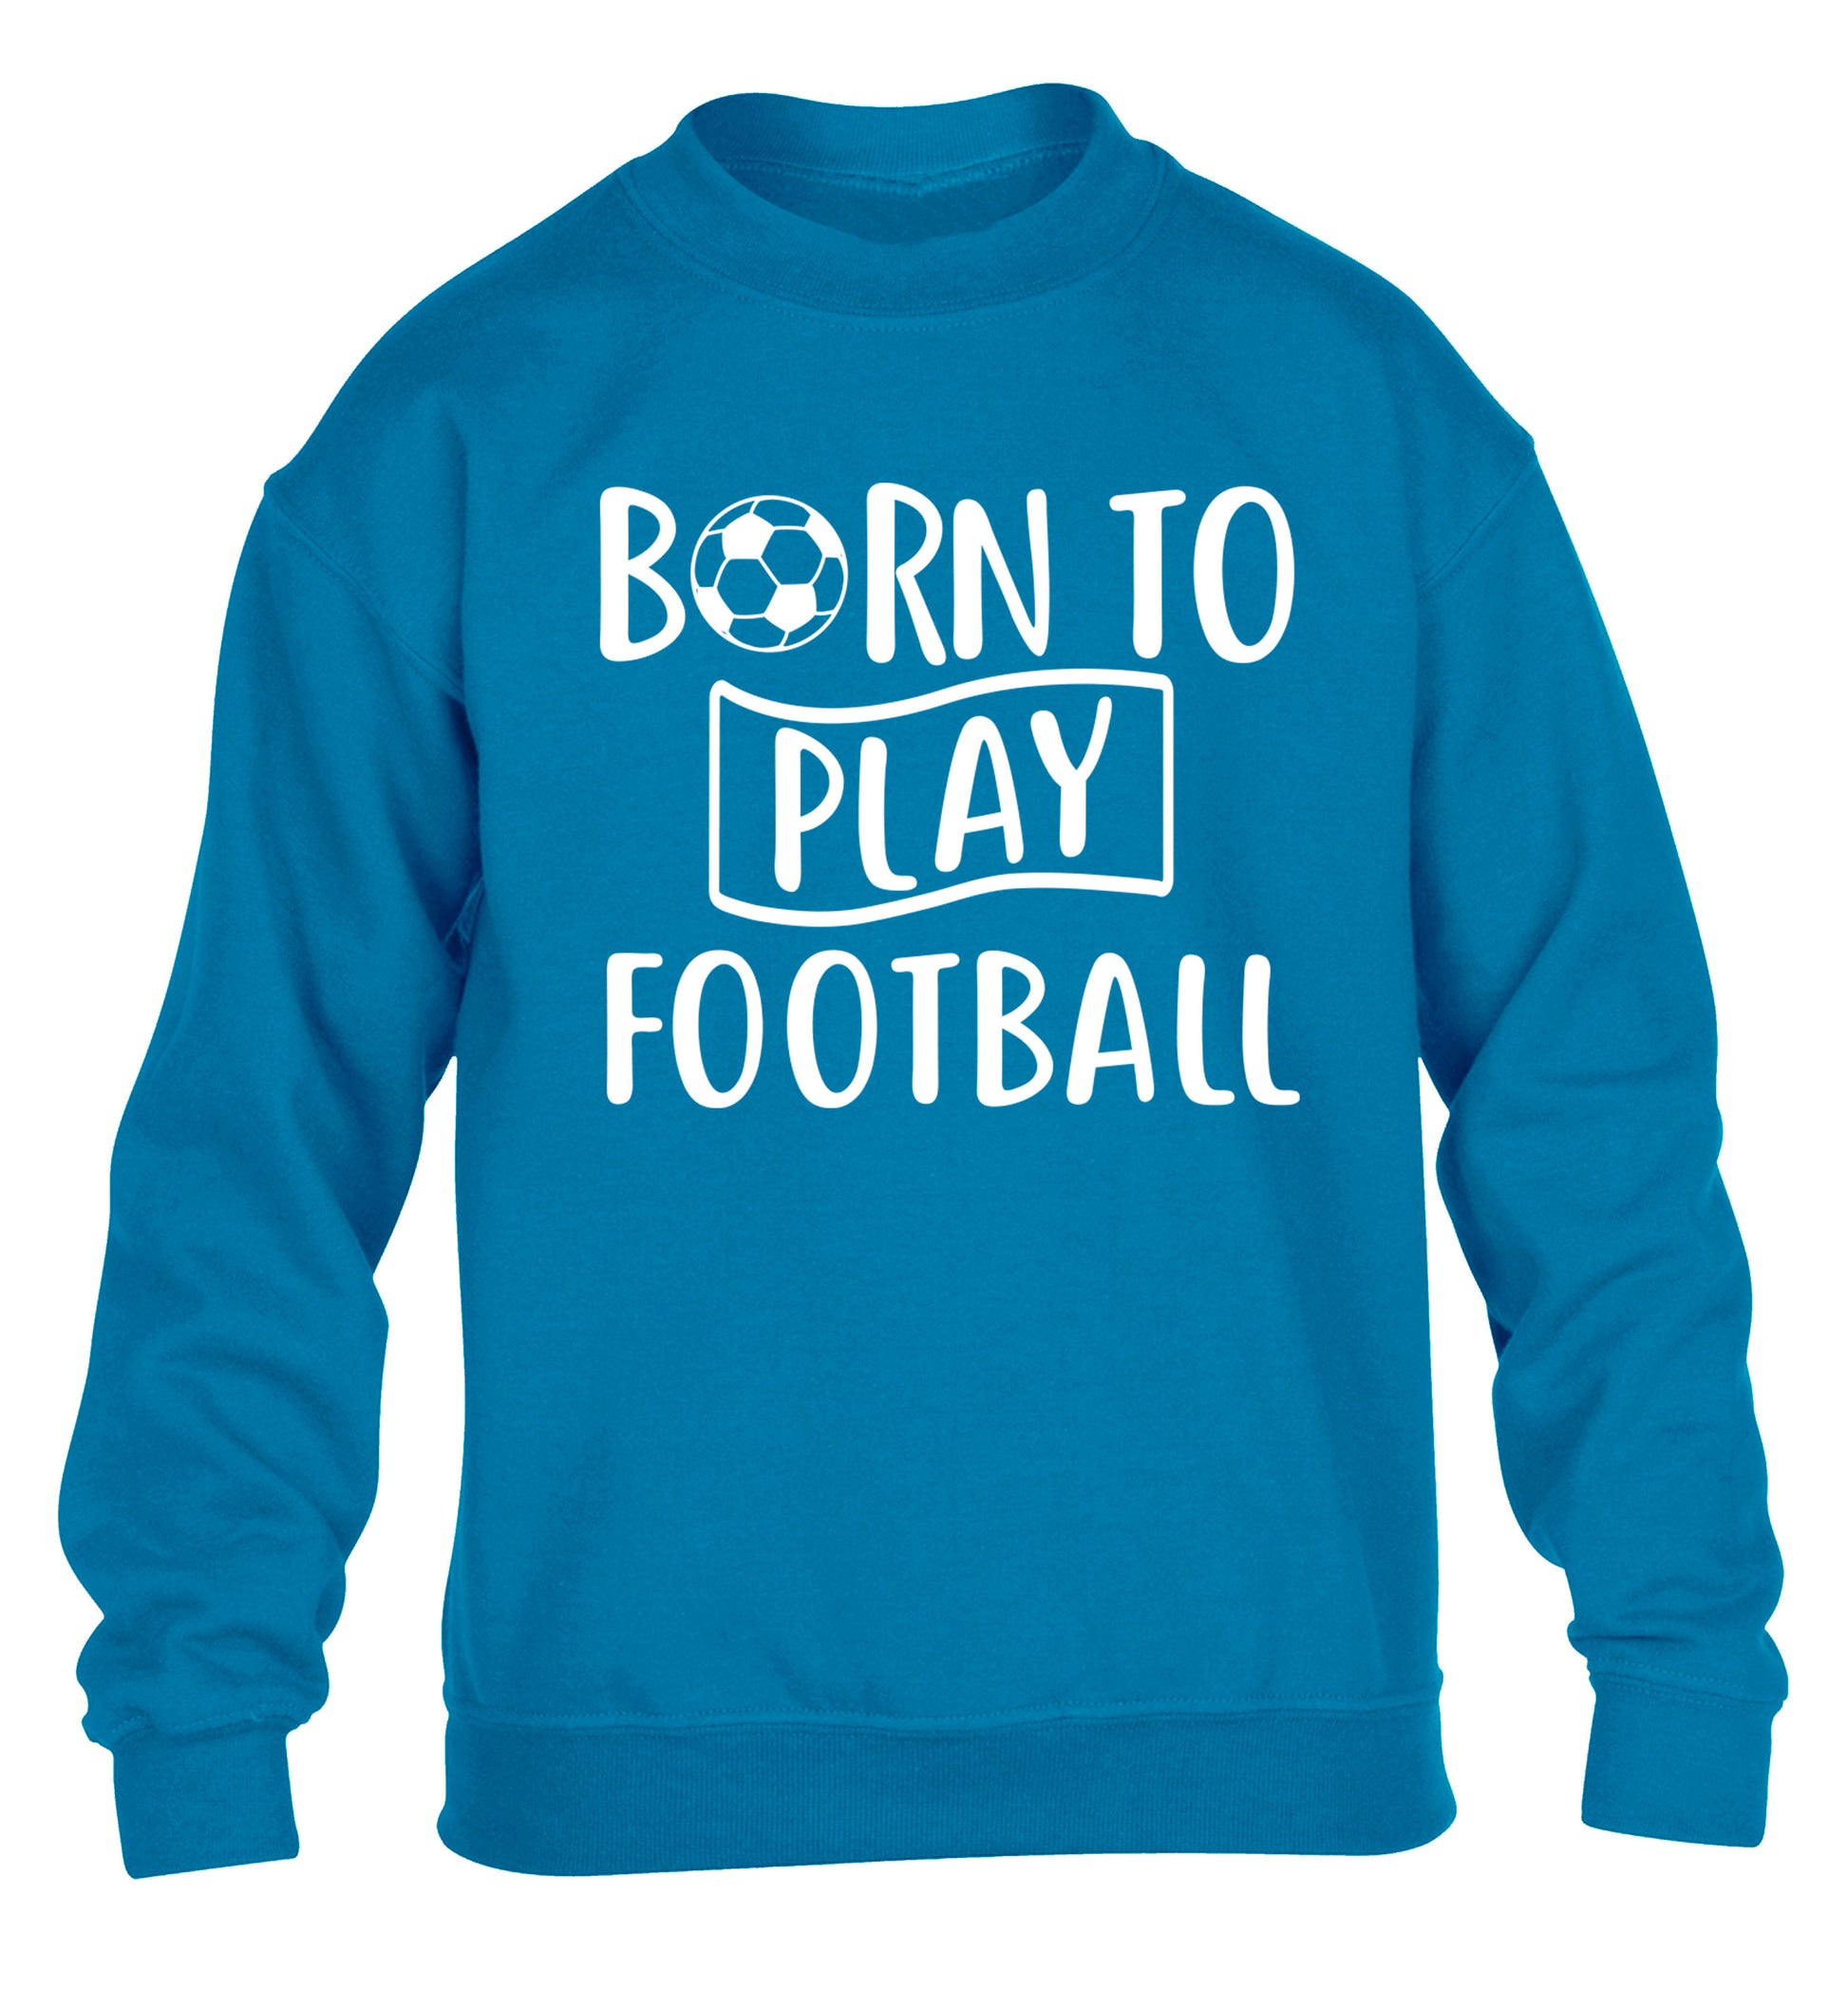 Born to play football children's blue sweater 12-14 Years